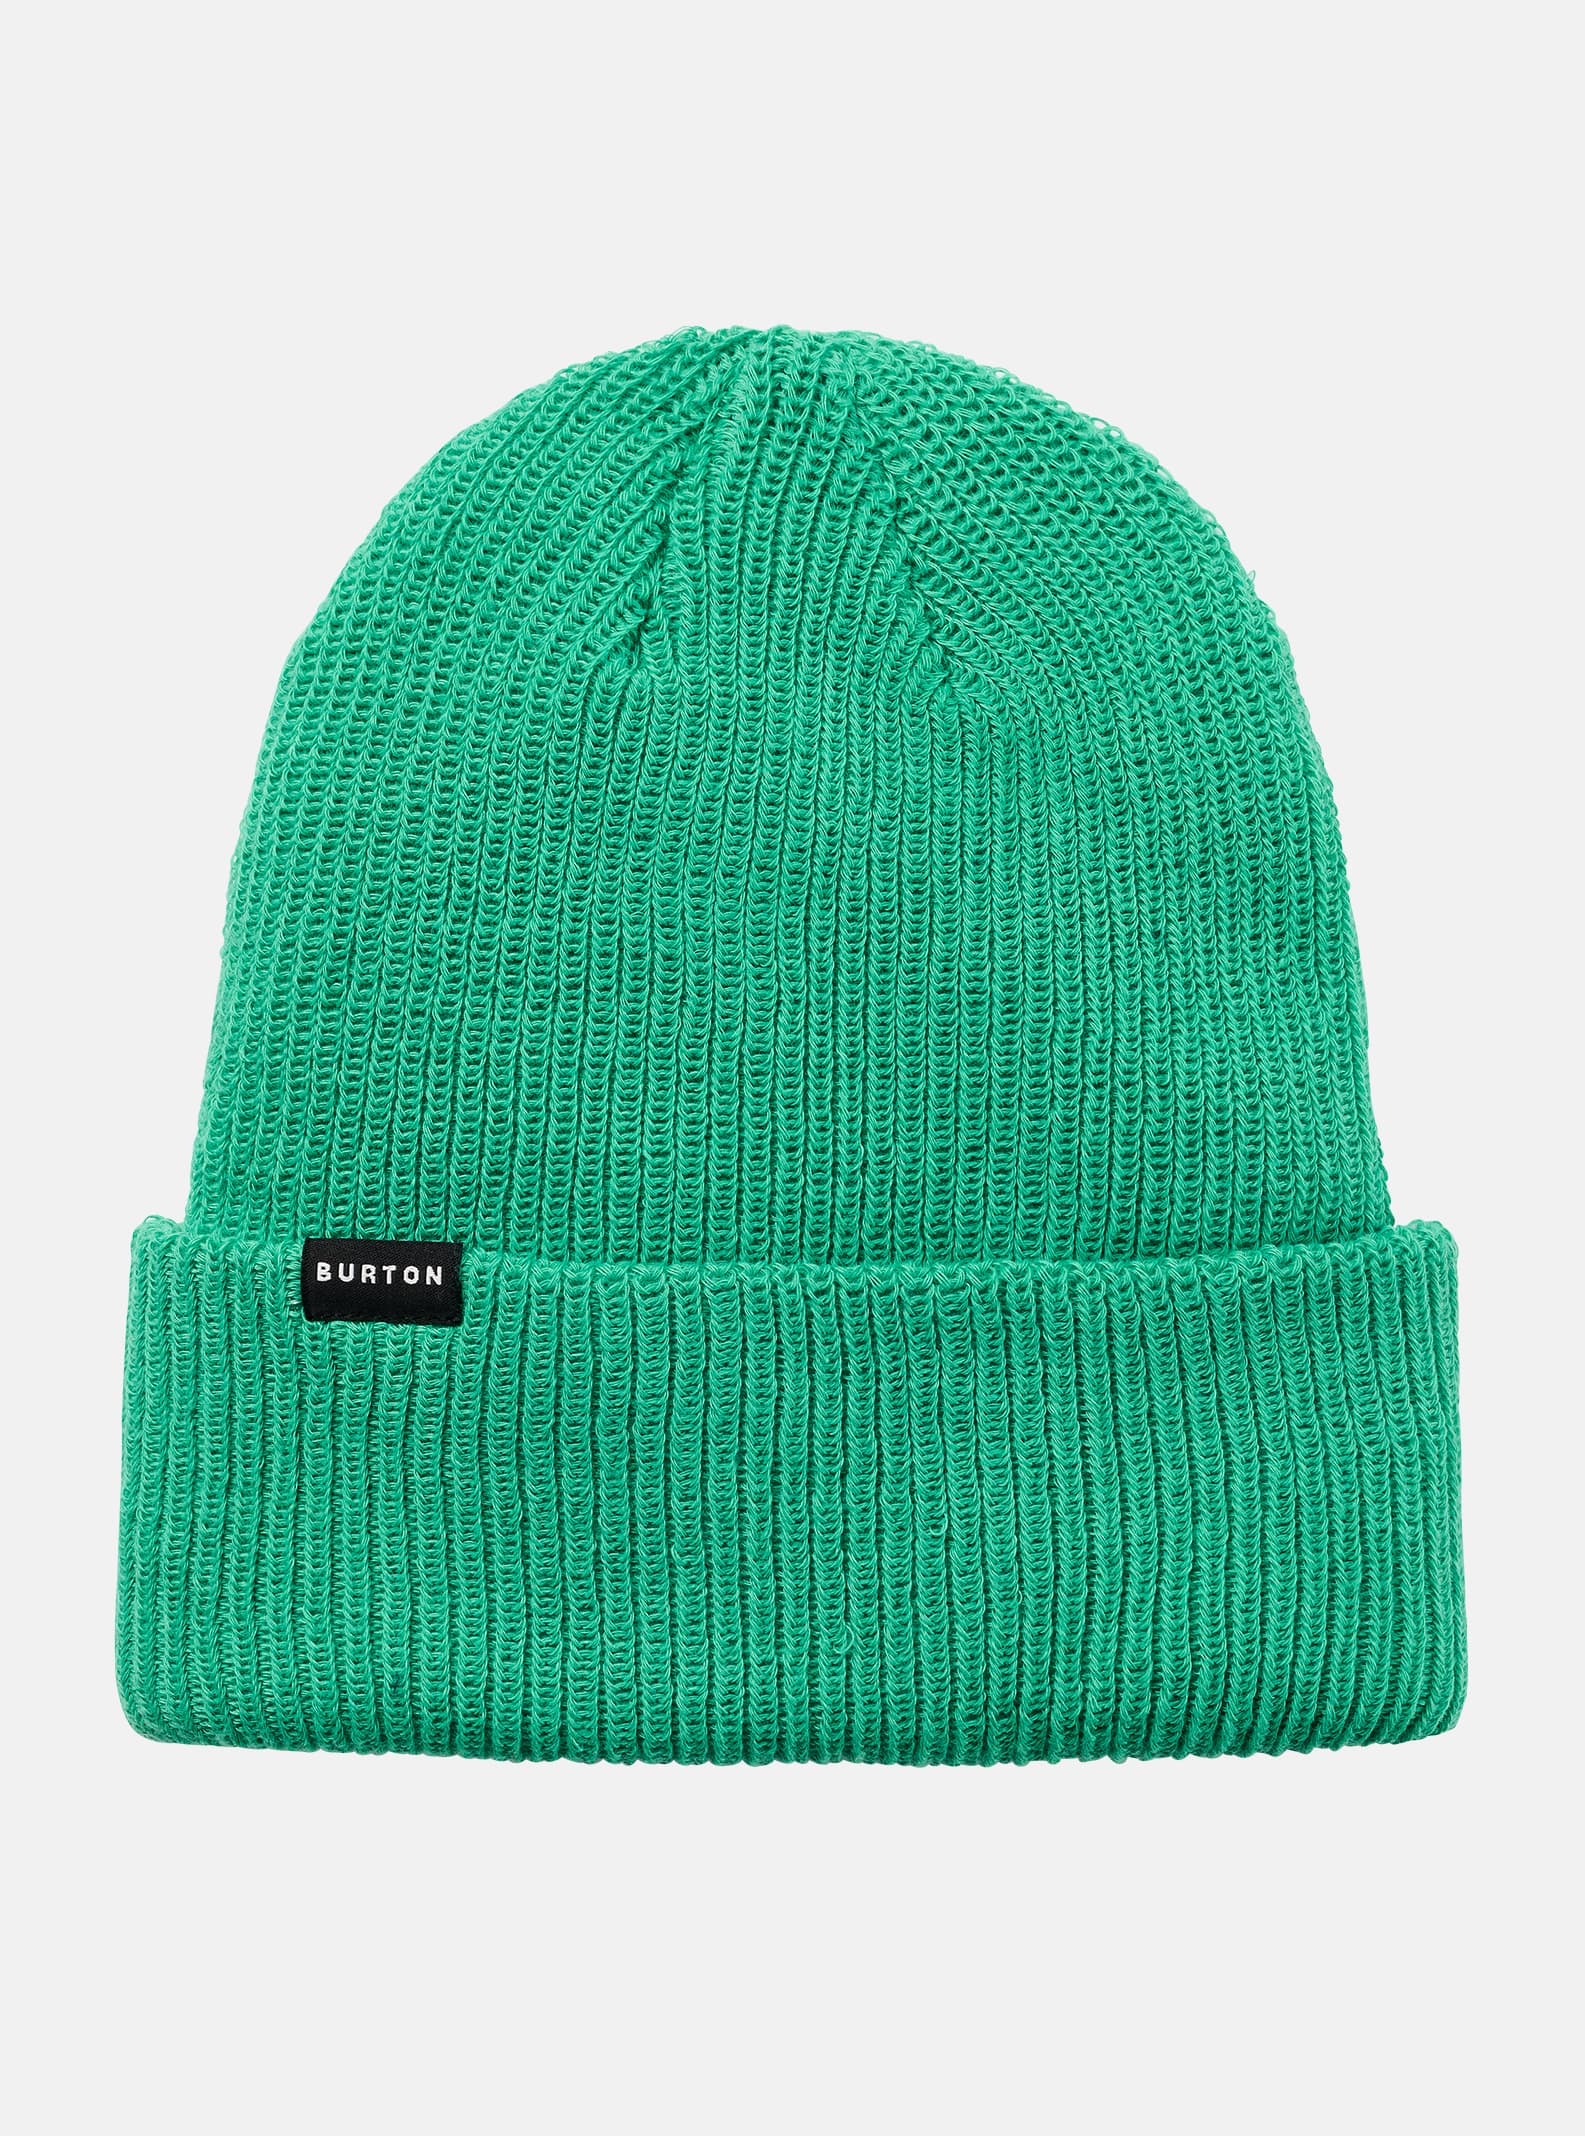 Green Ski Bobble  Hat Designed With Ireland Text And White Banner 